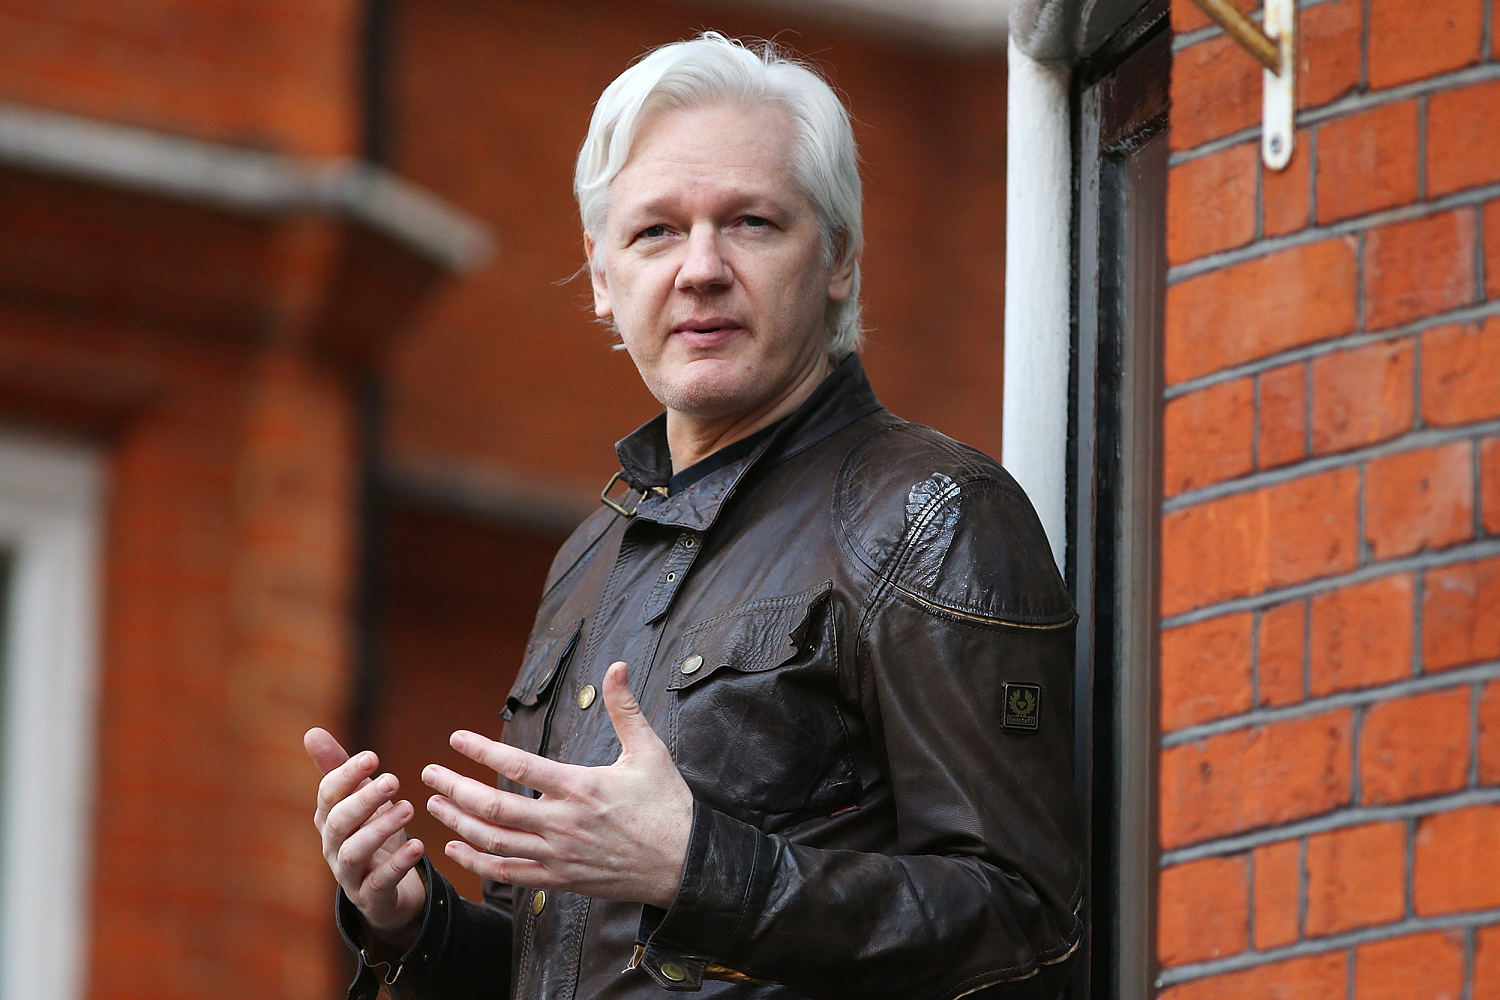 Biden says he is 'considering' Australia's request to end Julian Assange's prosecution